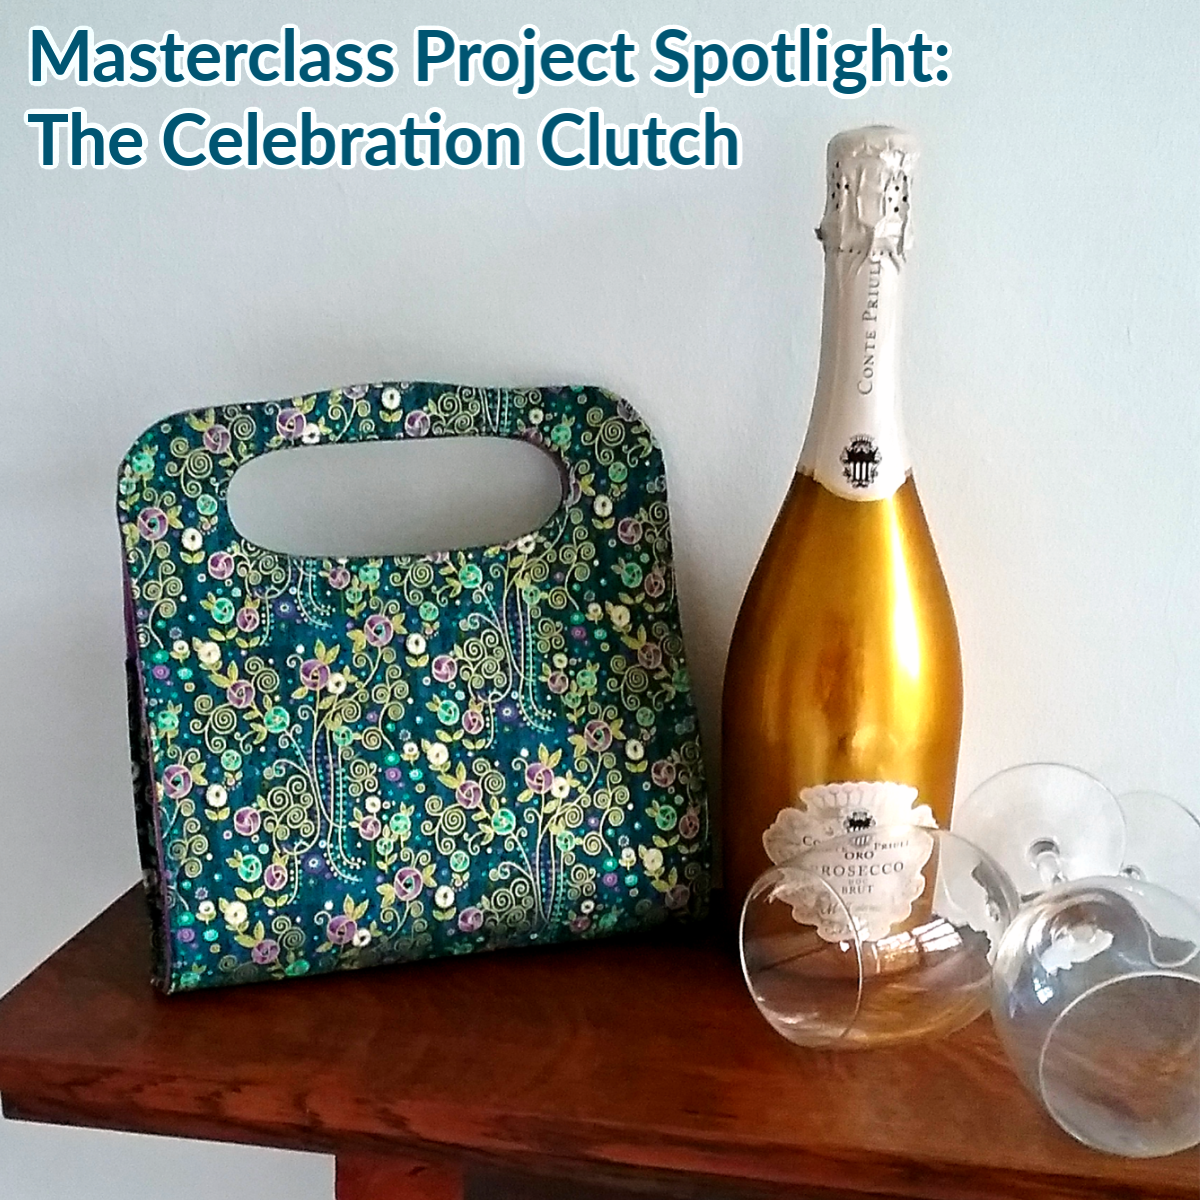 The Celebration Clutch from The Complete Bag Making Masterclass